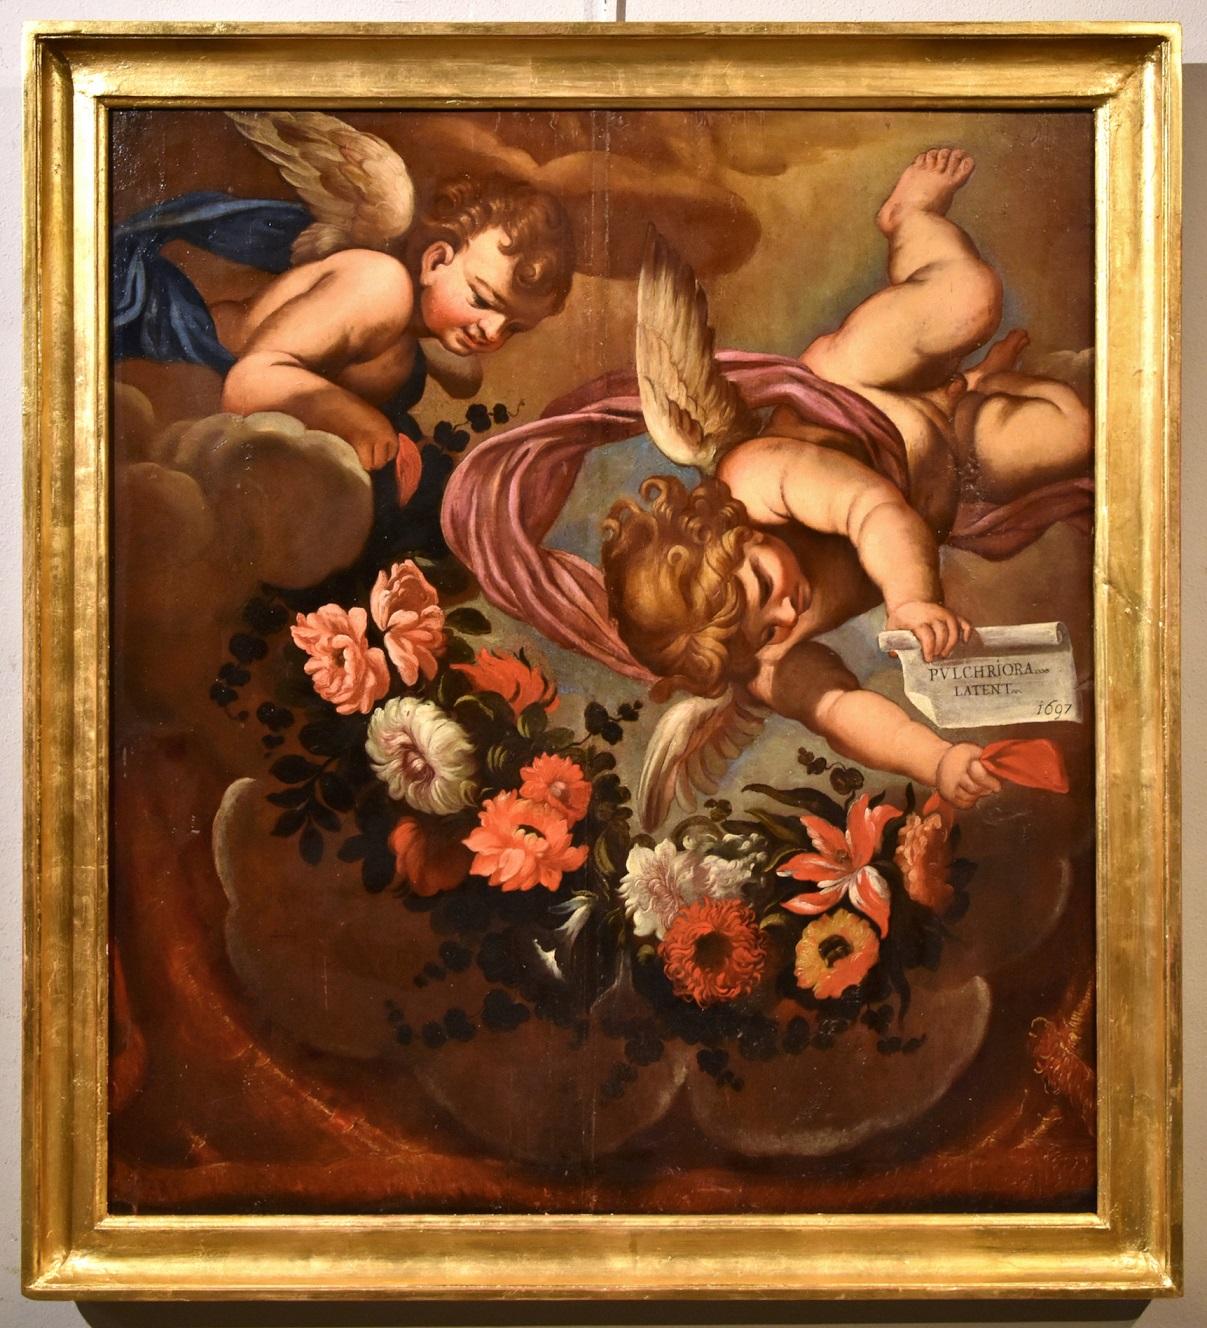 Angels Floral Garland Maratta Paint Oil on table Old master 17th Century Italian - Painting by Carlo Maratta (Camerano, 1625 - Rome, 1713)